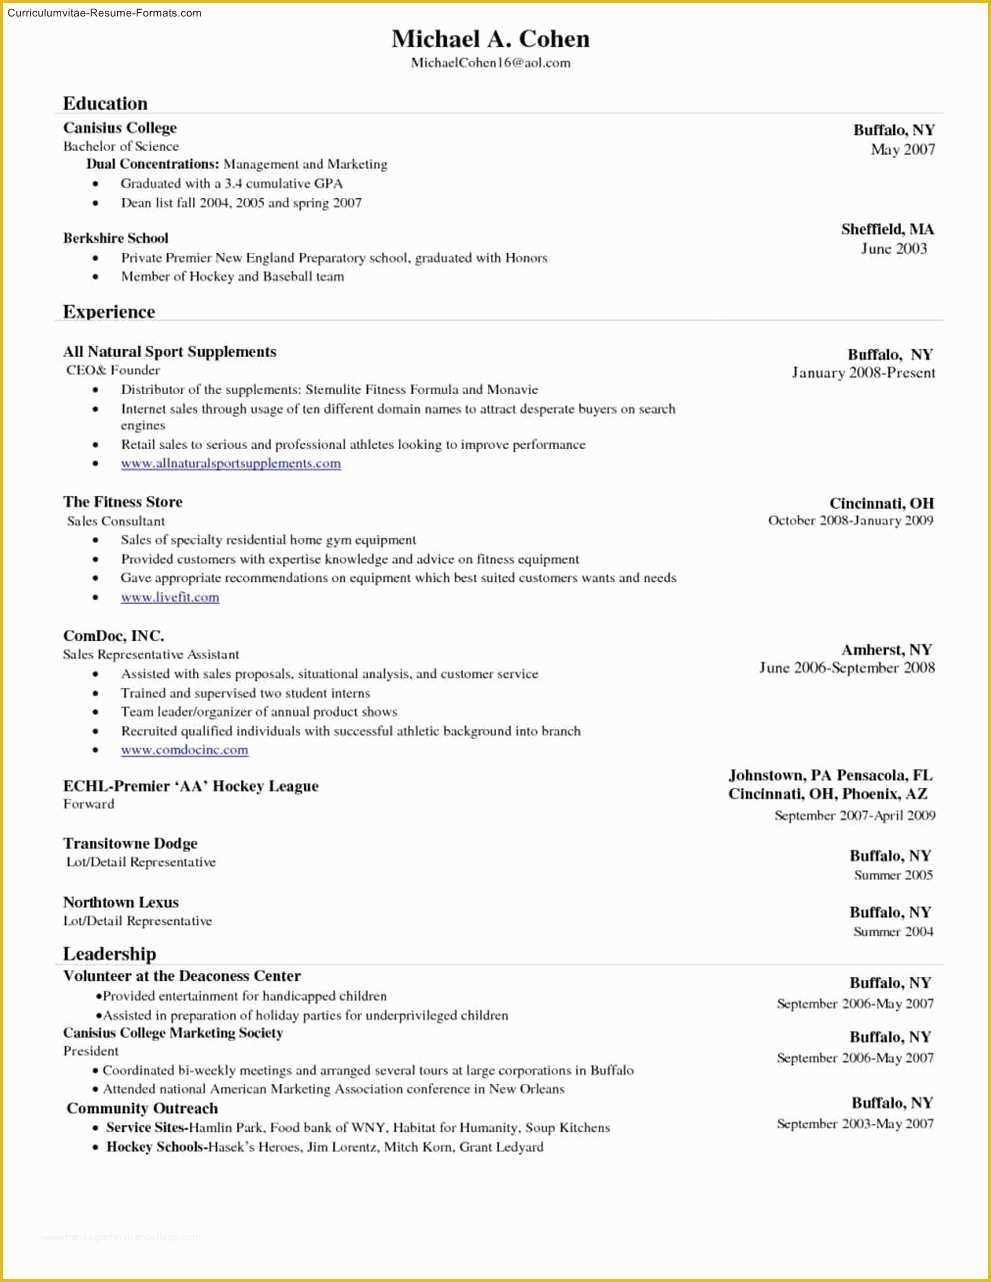 Free Microsoft Resume Templates for Word Of Microsoft Word 2010 Resume Template Download Free